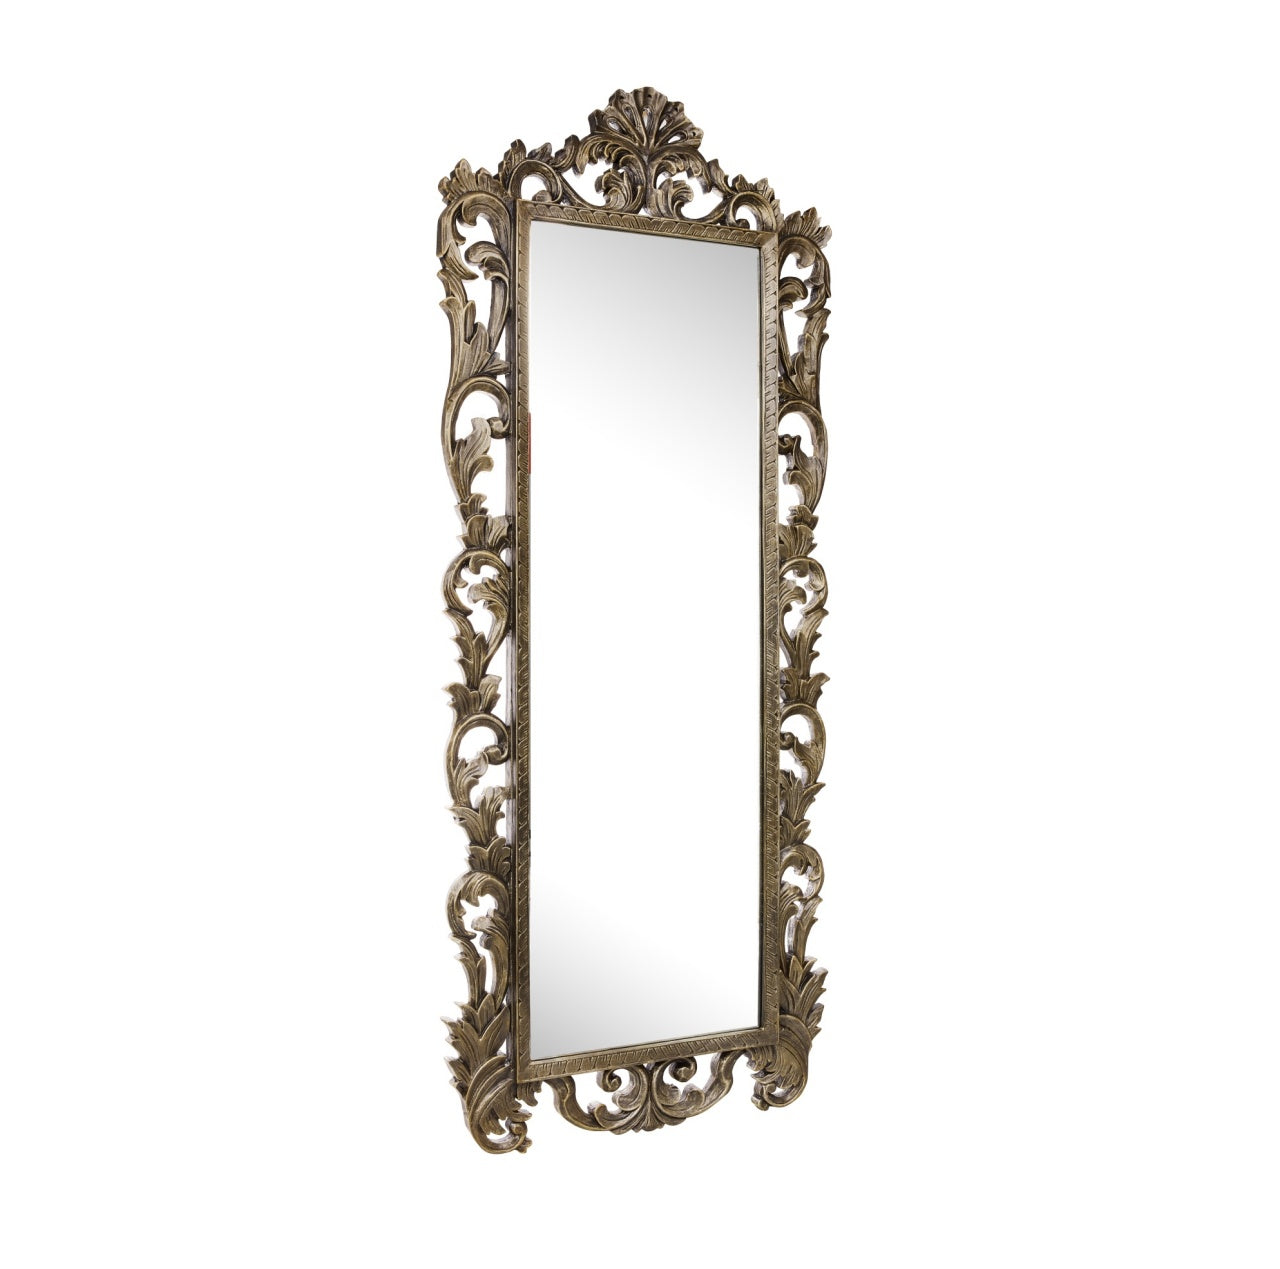 Robin Mirror Pewter Silver - Paramount Mirrors and Prints